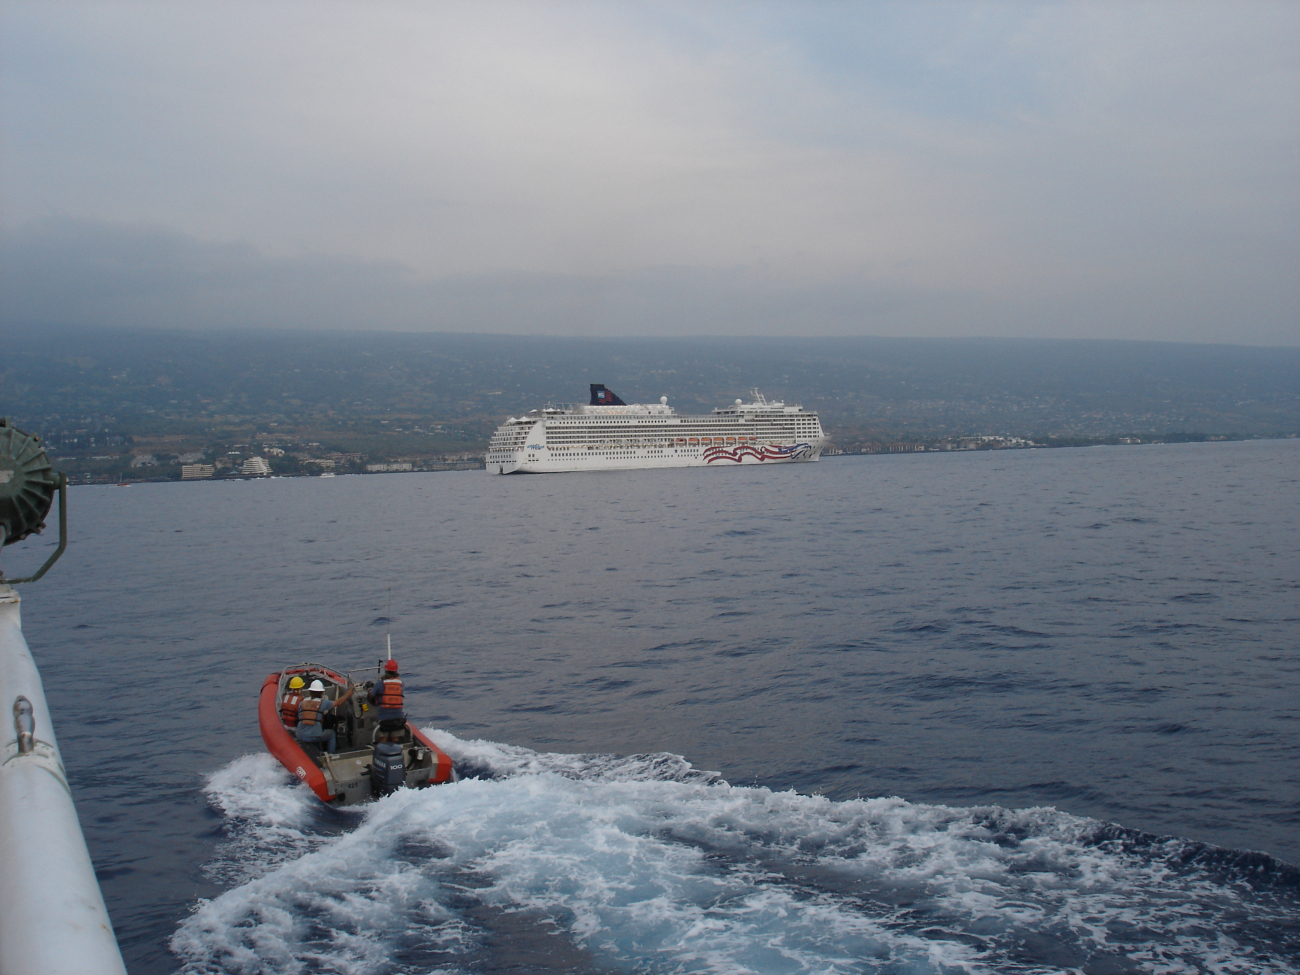 Inflatable boat leaves the NOAA ship OSCAR ELTON SETTE while the cruiseship PRIDE OF AMERICA is anchored offshore